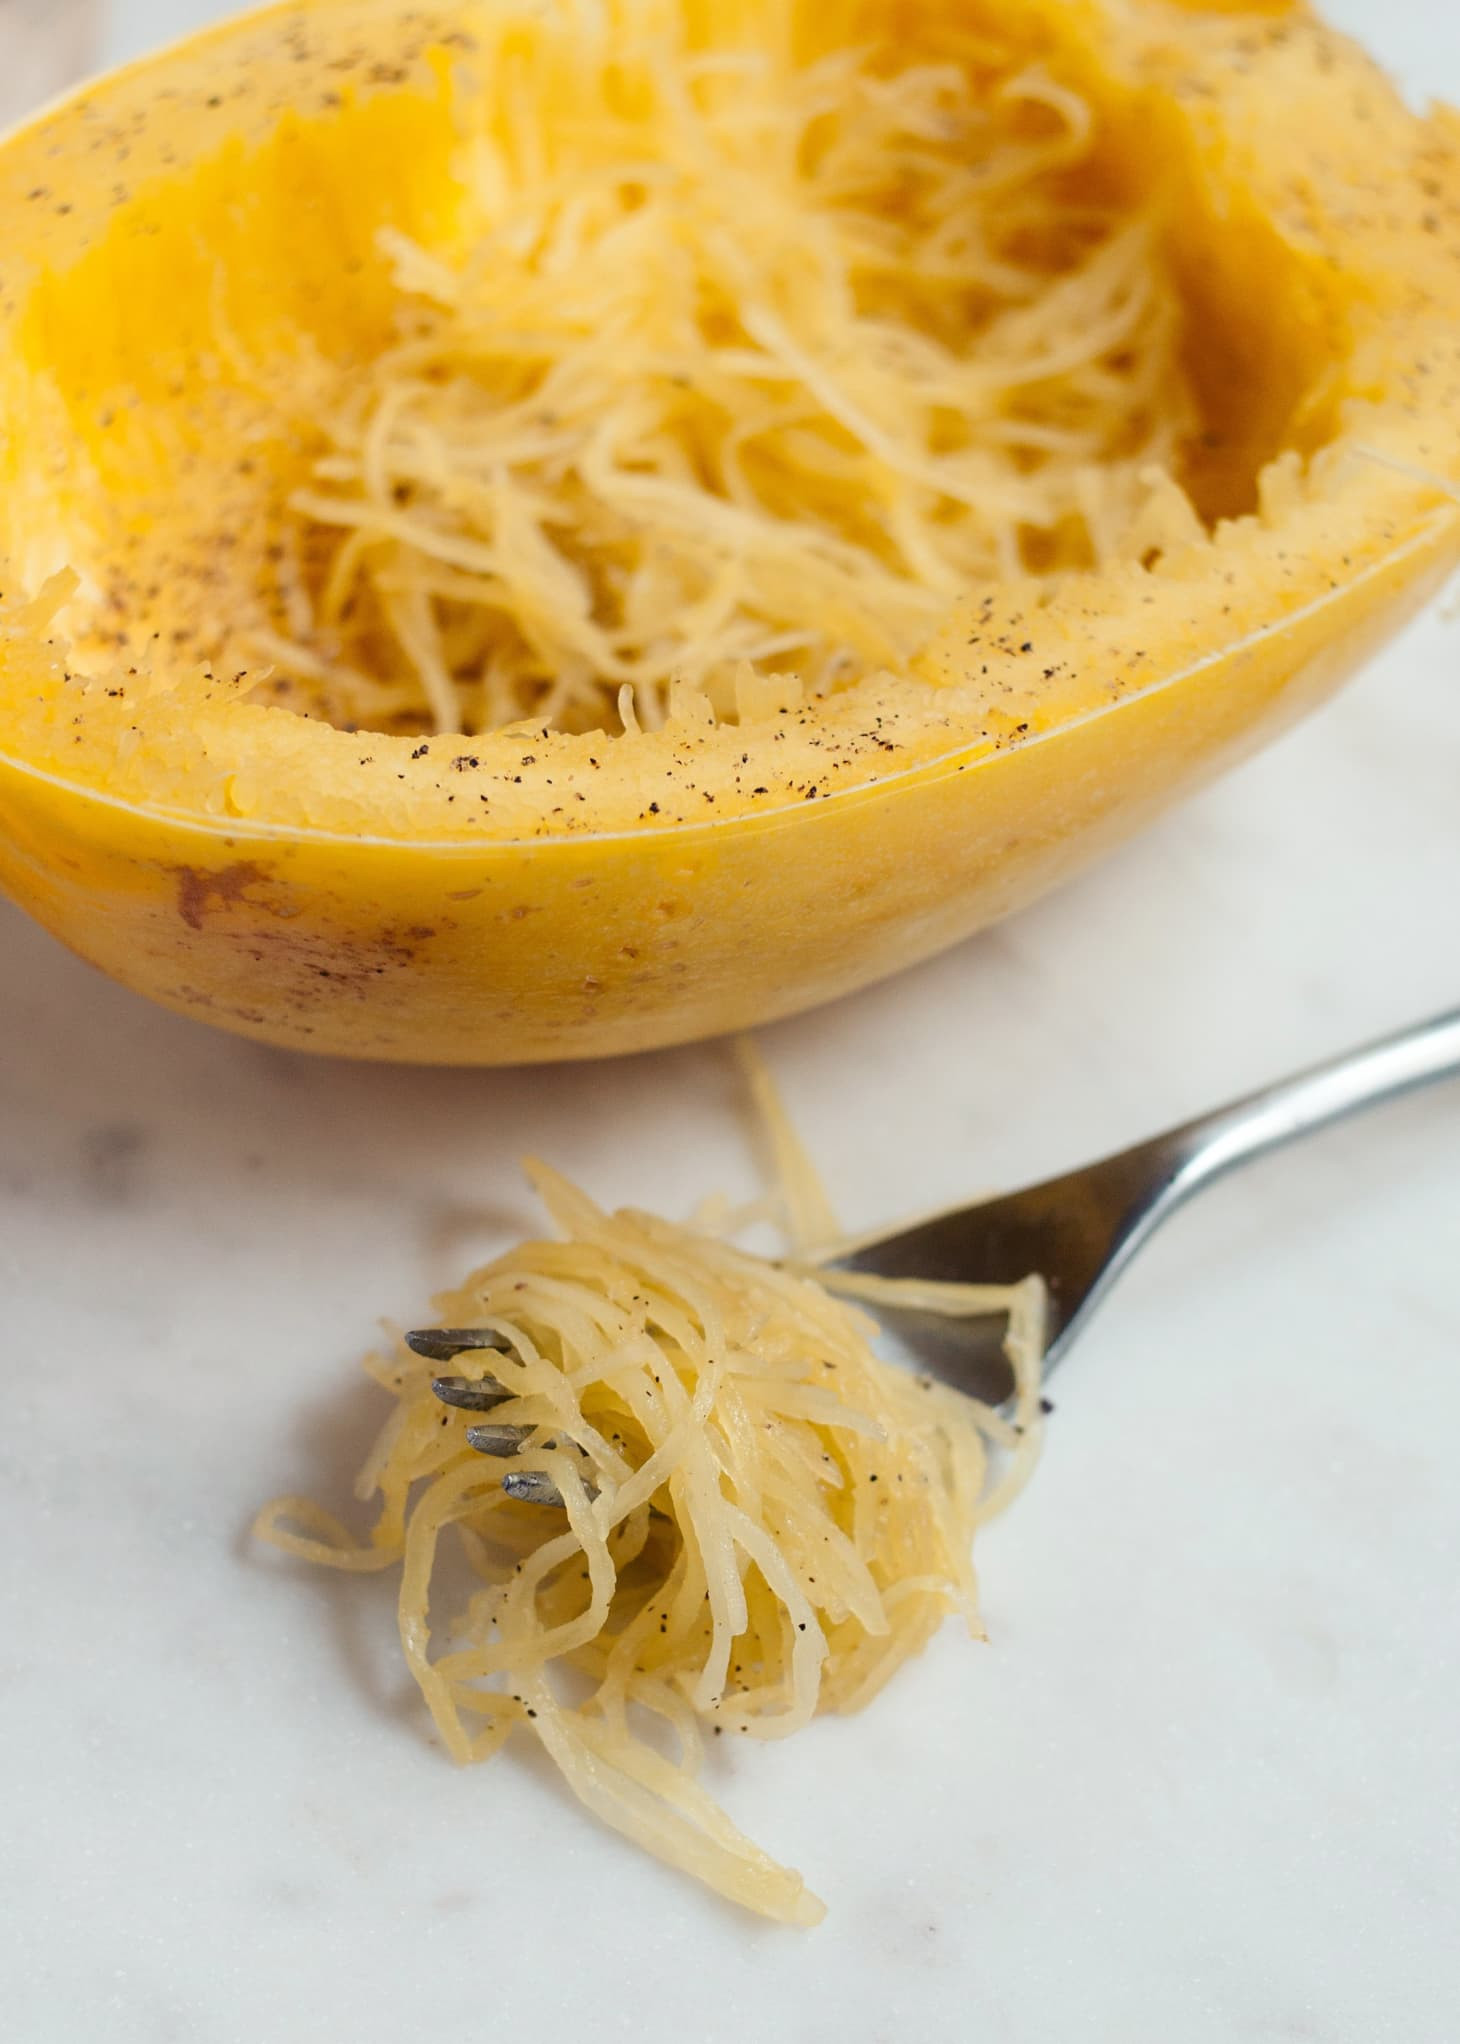 Microwaved Spaghetti Squash Awesome How to Cook Spaghetti Squash In the Microwave